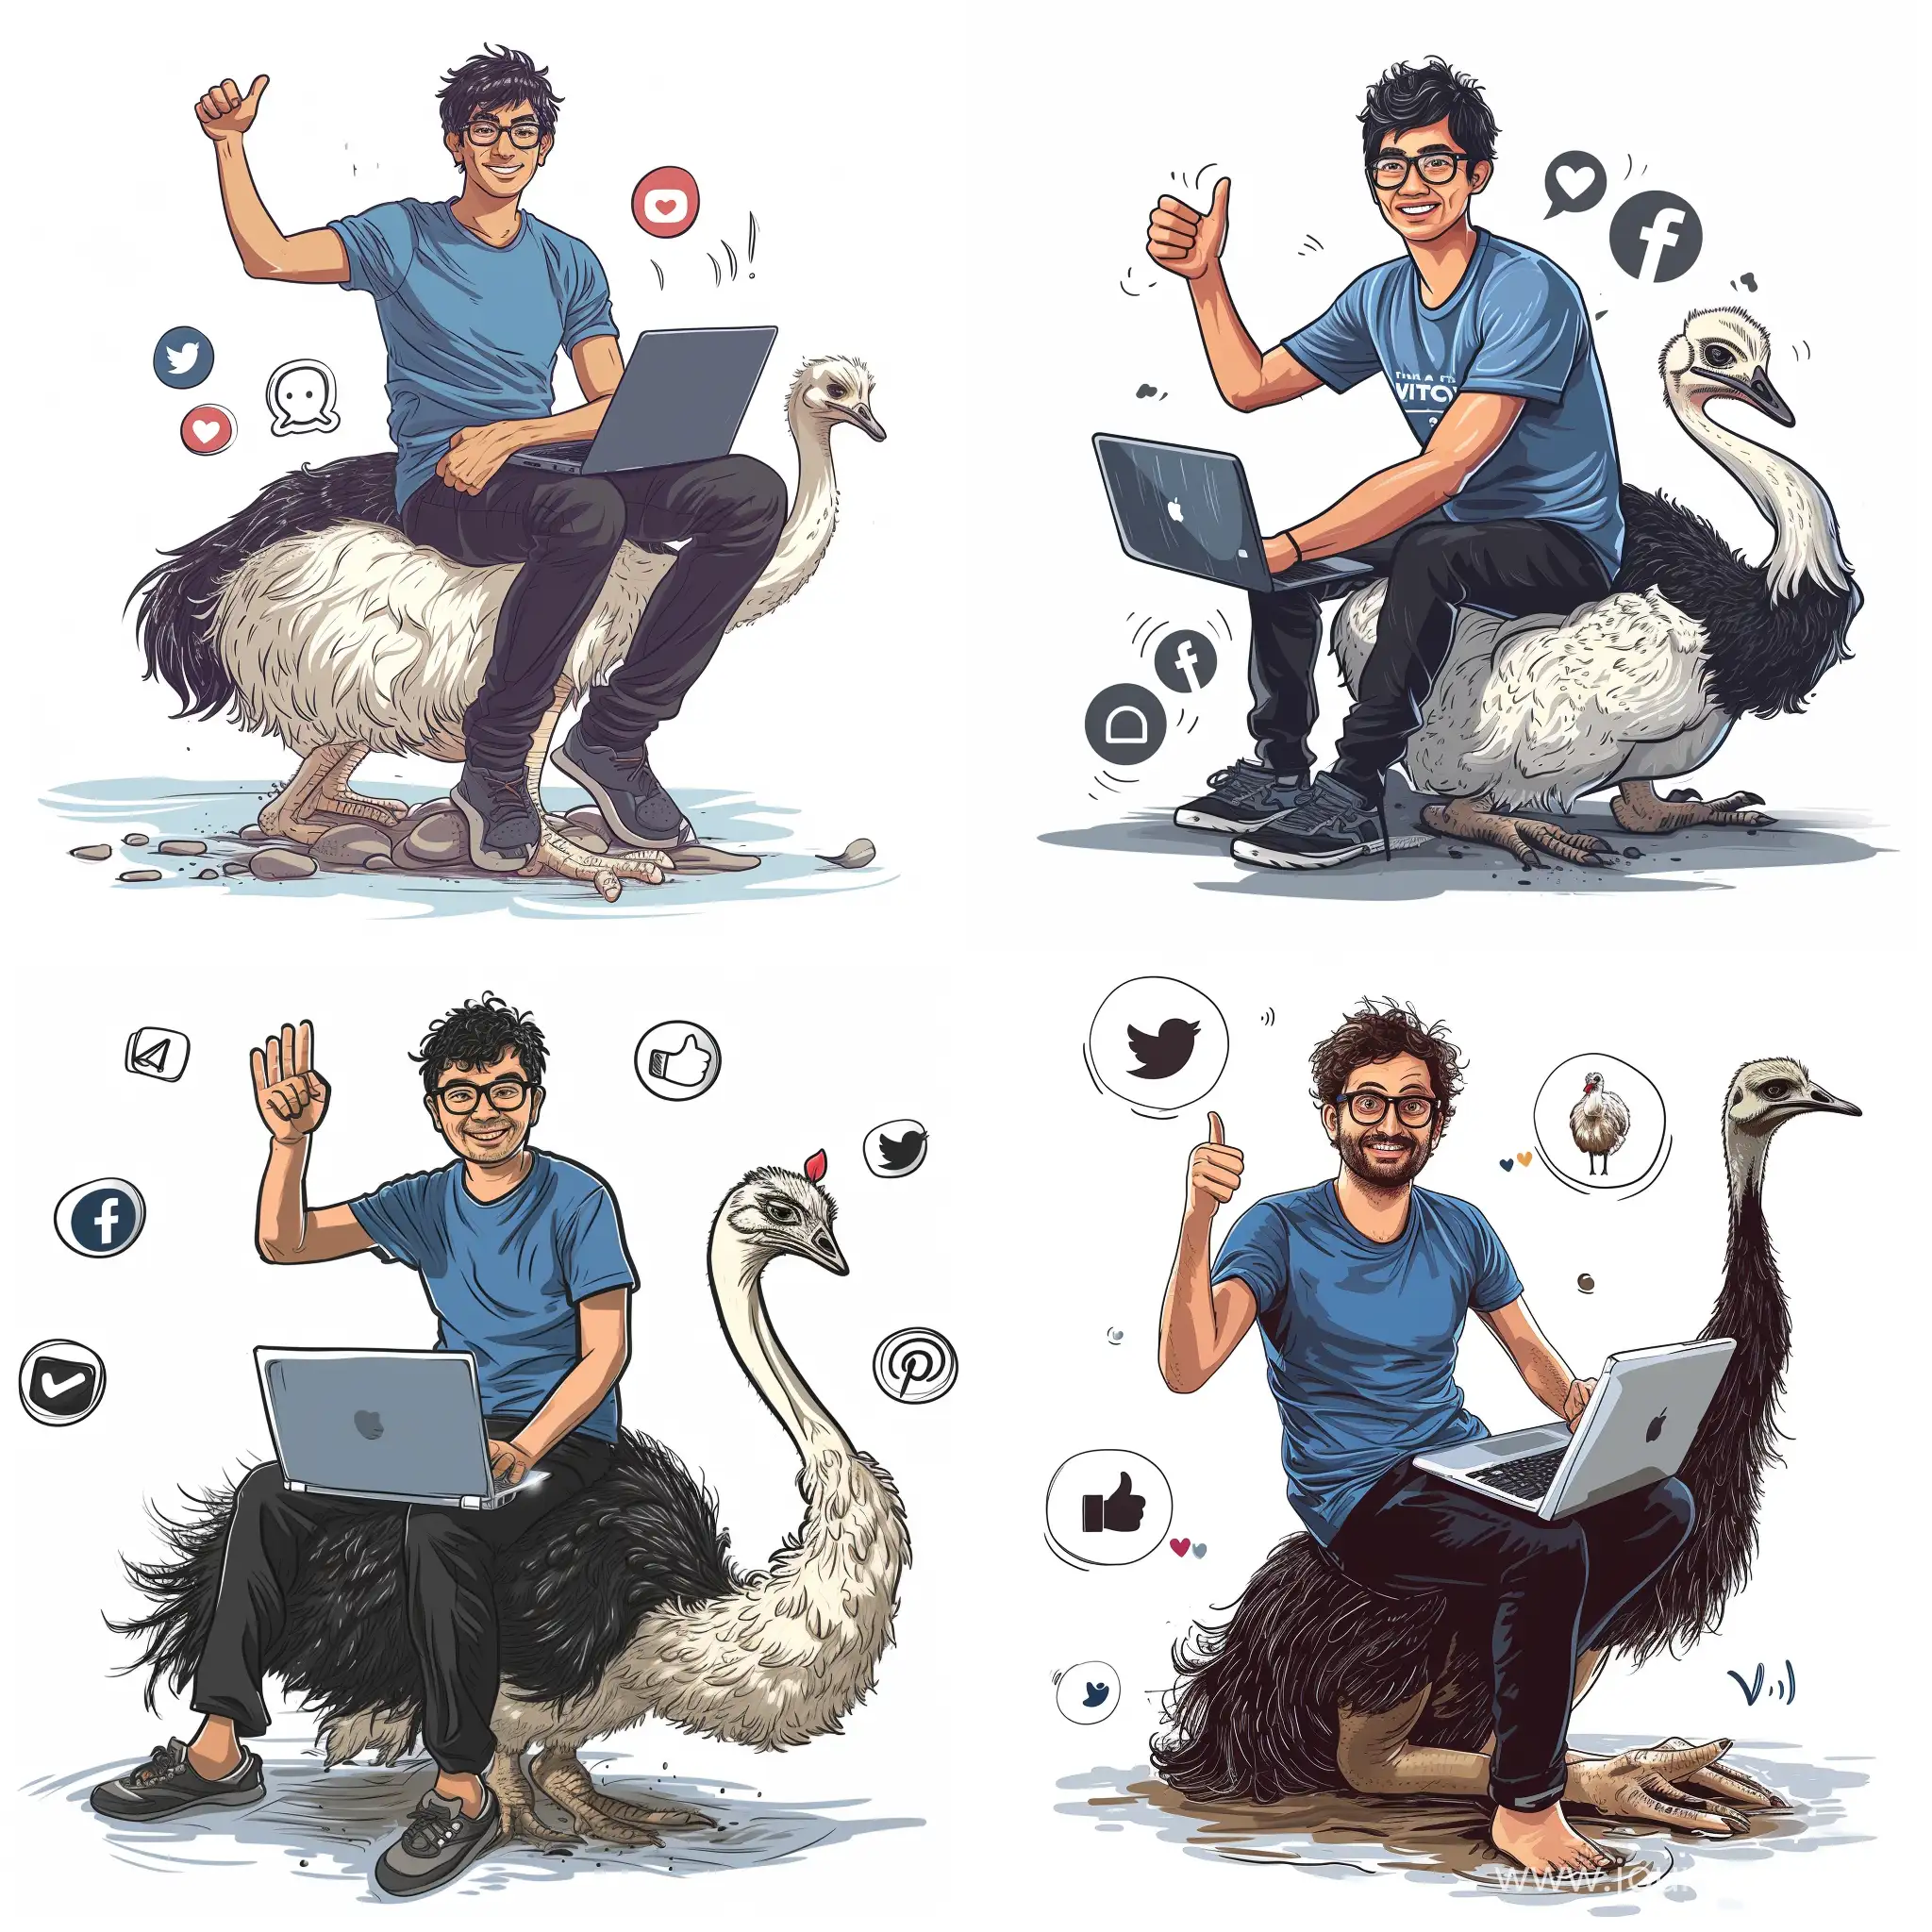 Young-Programmer-on-Ostrich-Thumbs-Up-and-Social-Media-Icons